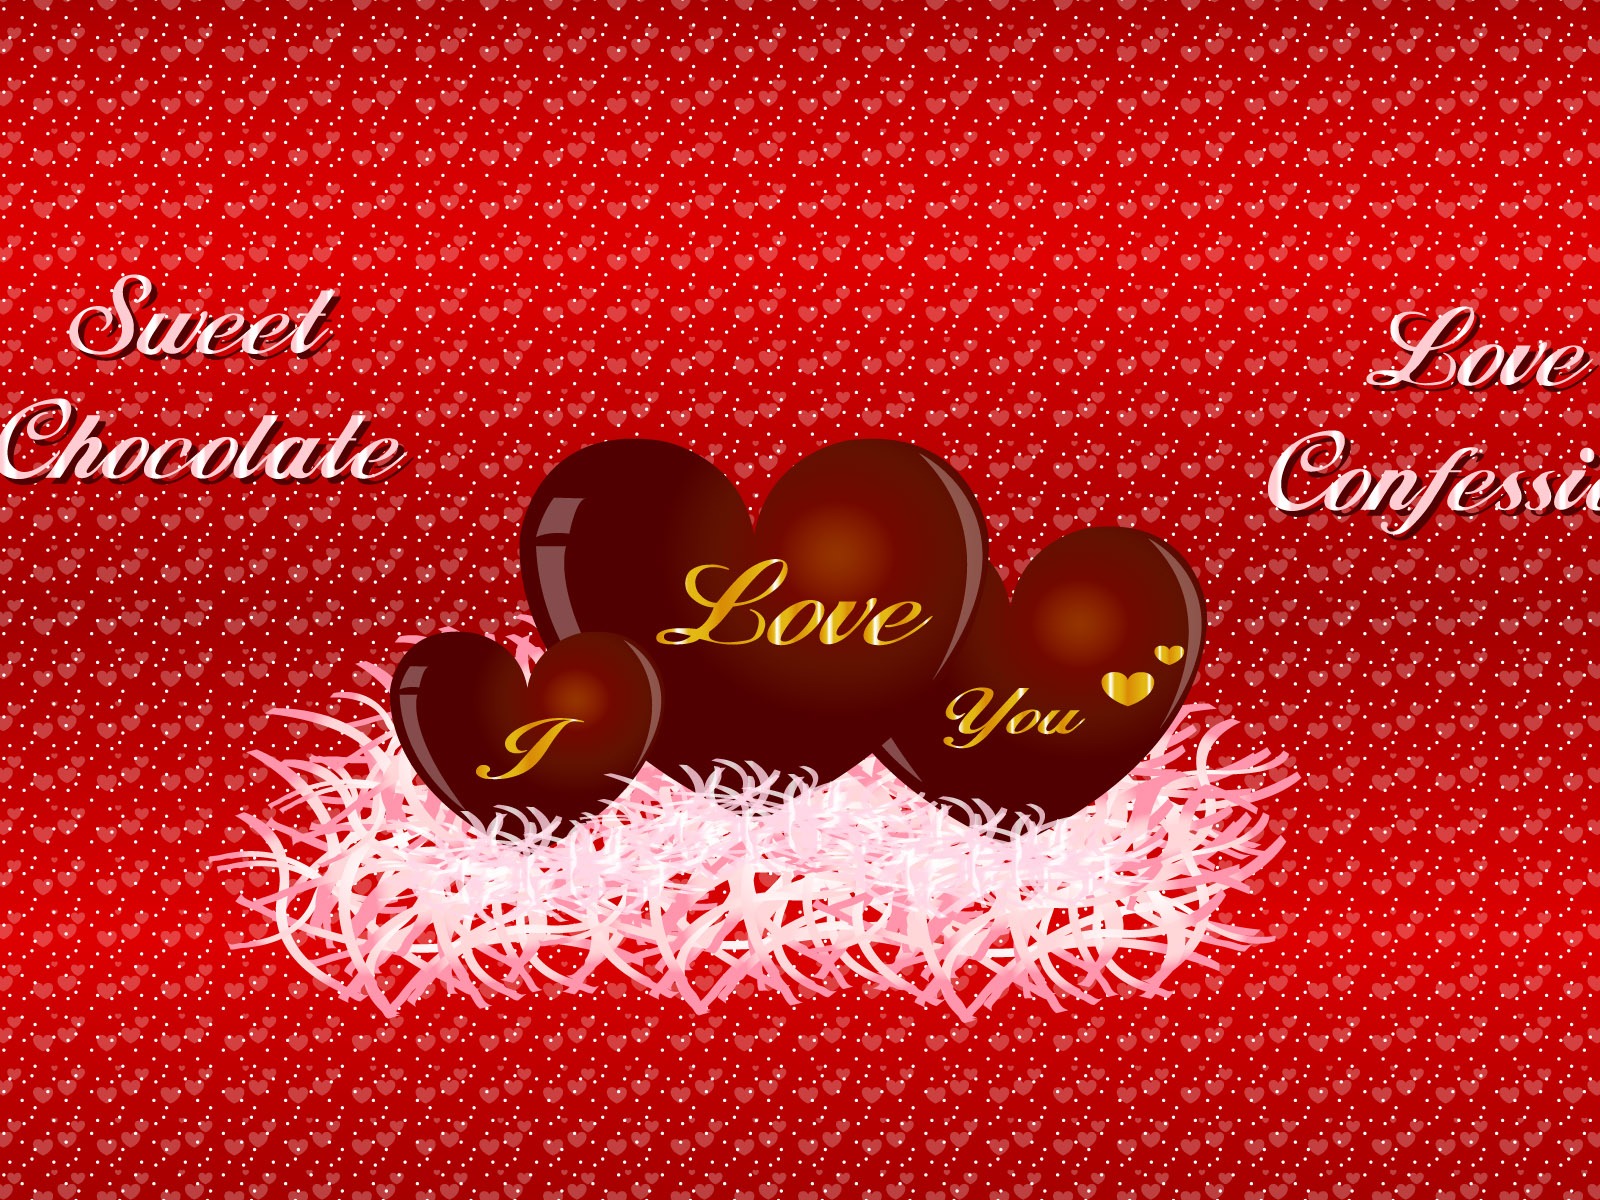 Valentine's Day Theme Wallpapers (1) #15 - 1600x1200